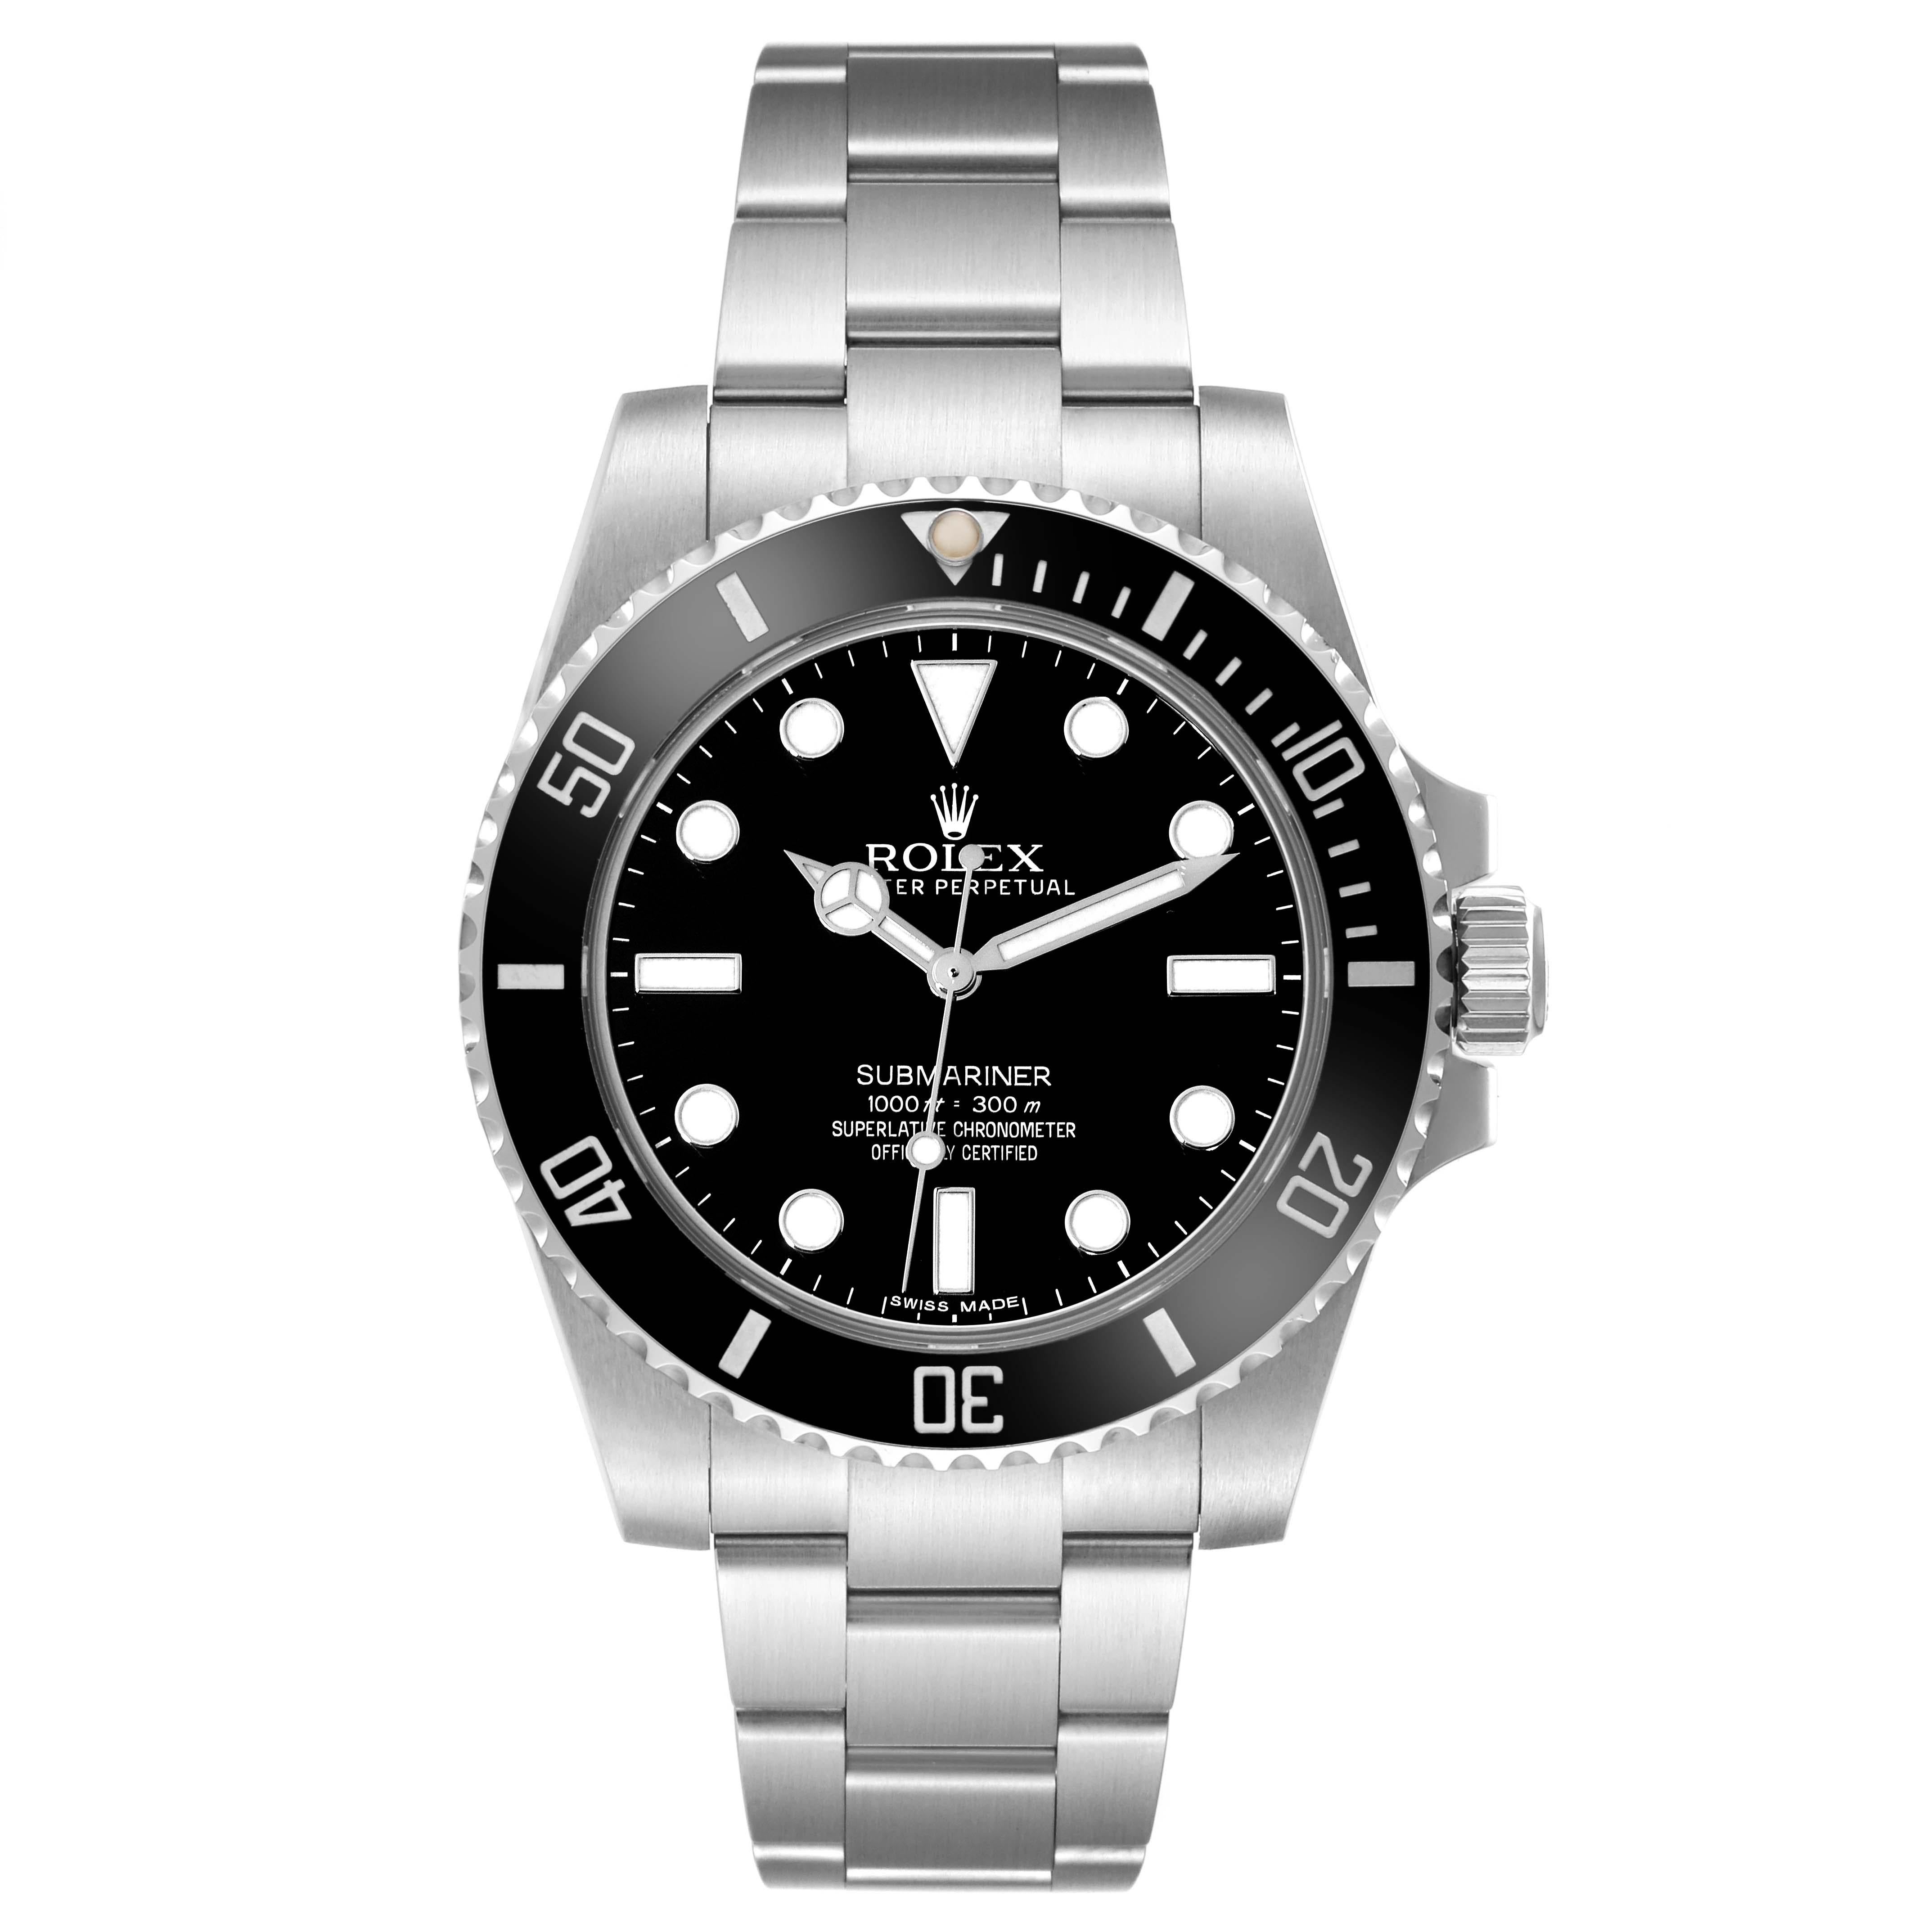 Rolex Submariner Black Dial Ceramic Bezel Steel Mens Watch 114060. Officially certified chronometer automatic self-winding movement. Stainless steel case 40.0 mm in diameter. Rolex logo on the crown. Stainless steel uni-directional rotating bezel